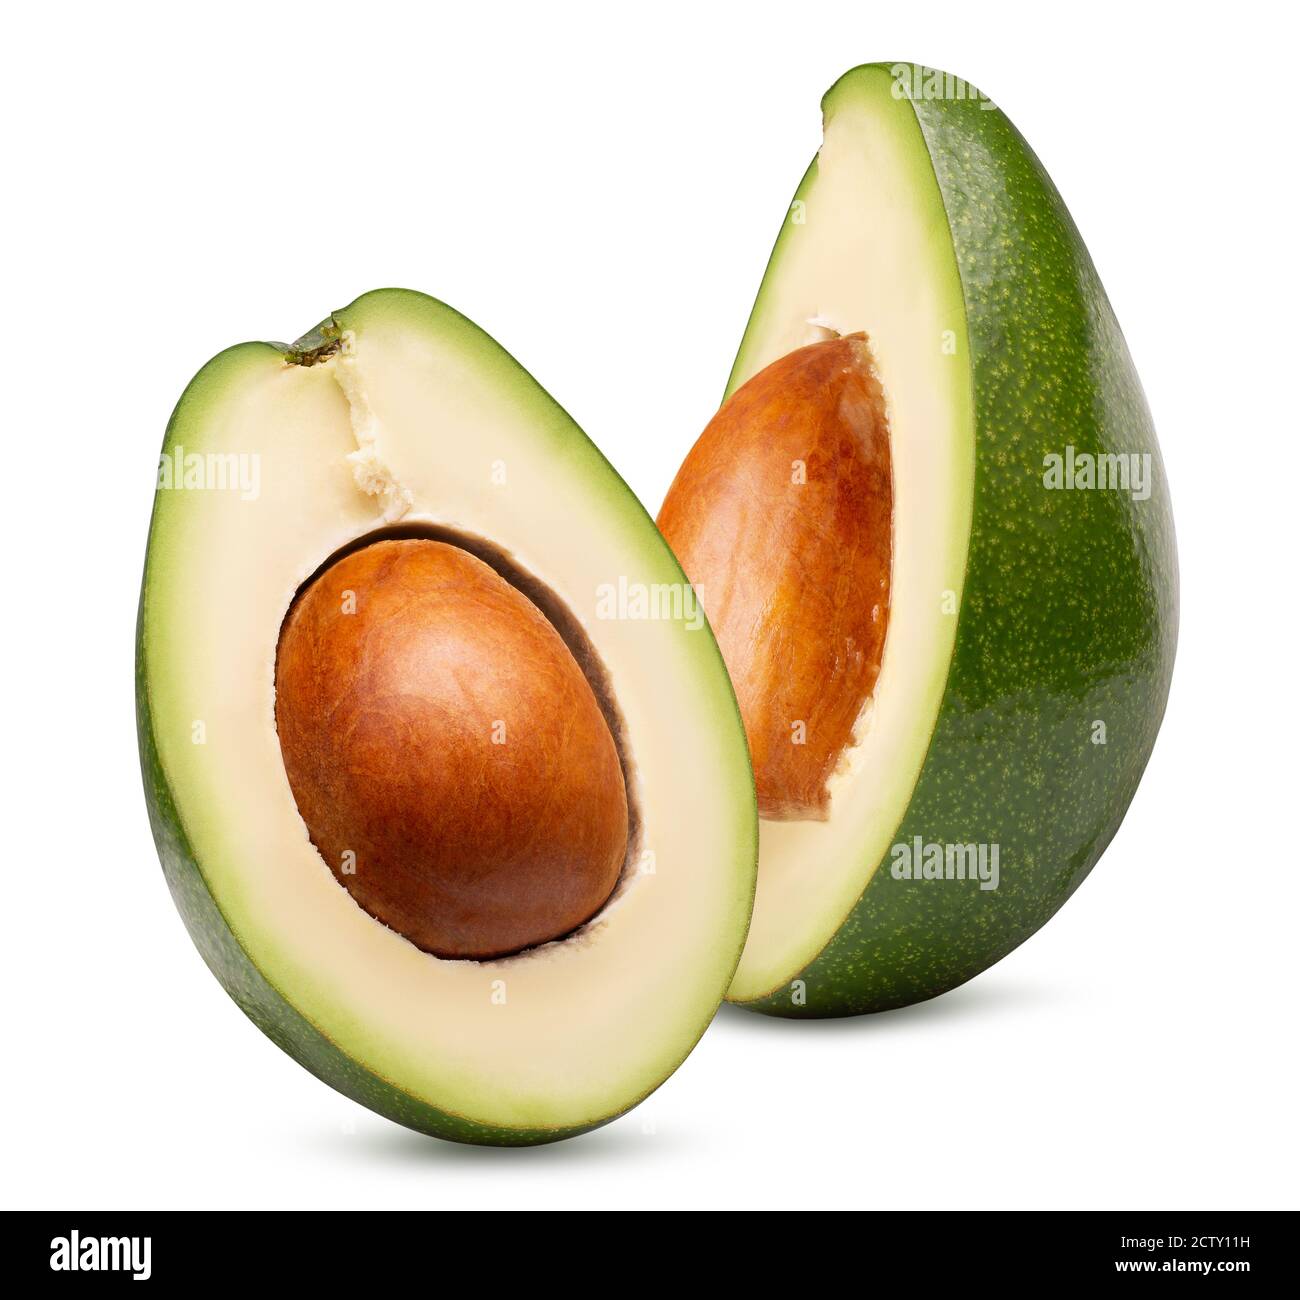 two halves of avocado isolated on a white background. Stock Photo